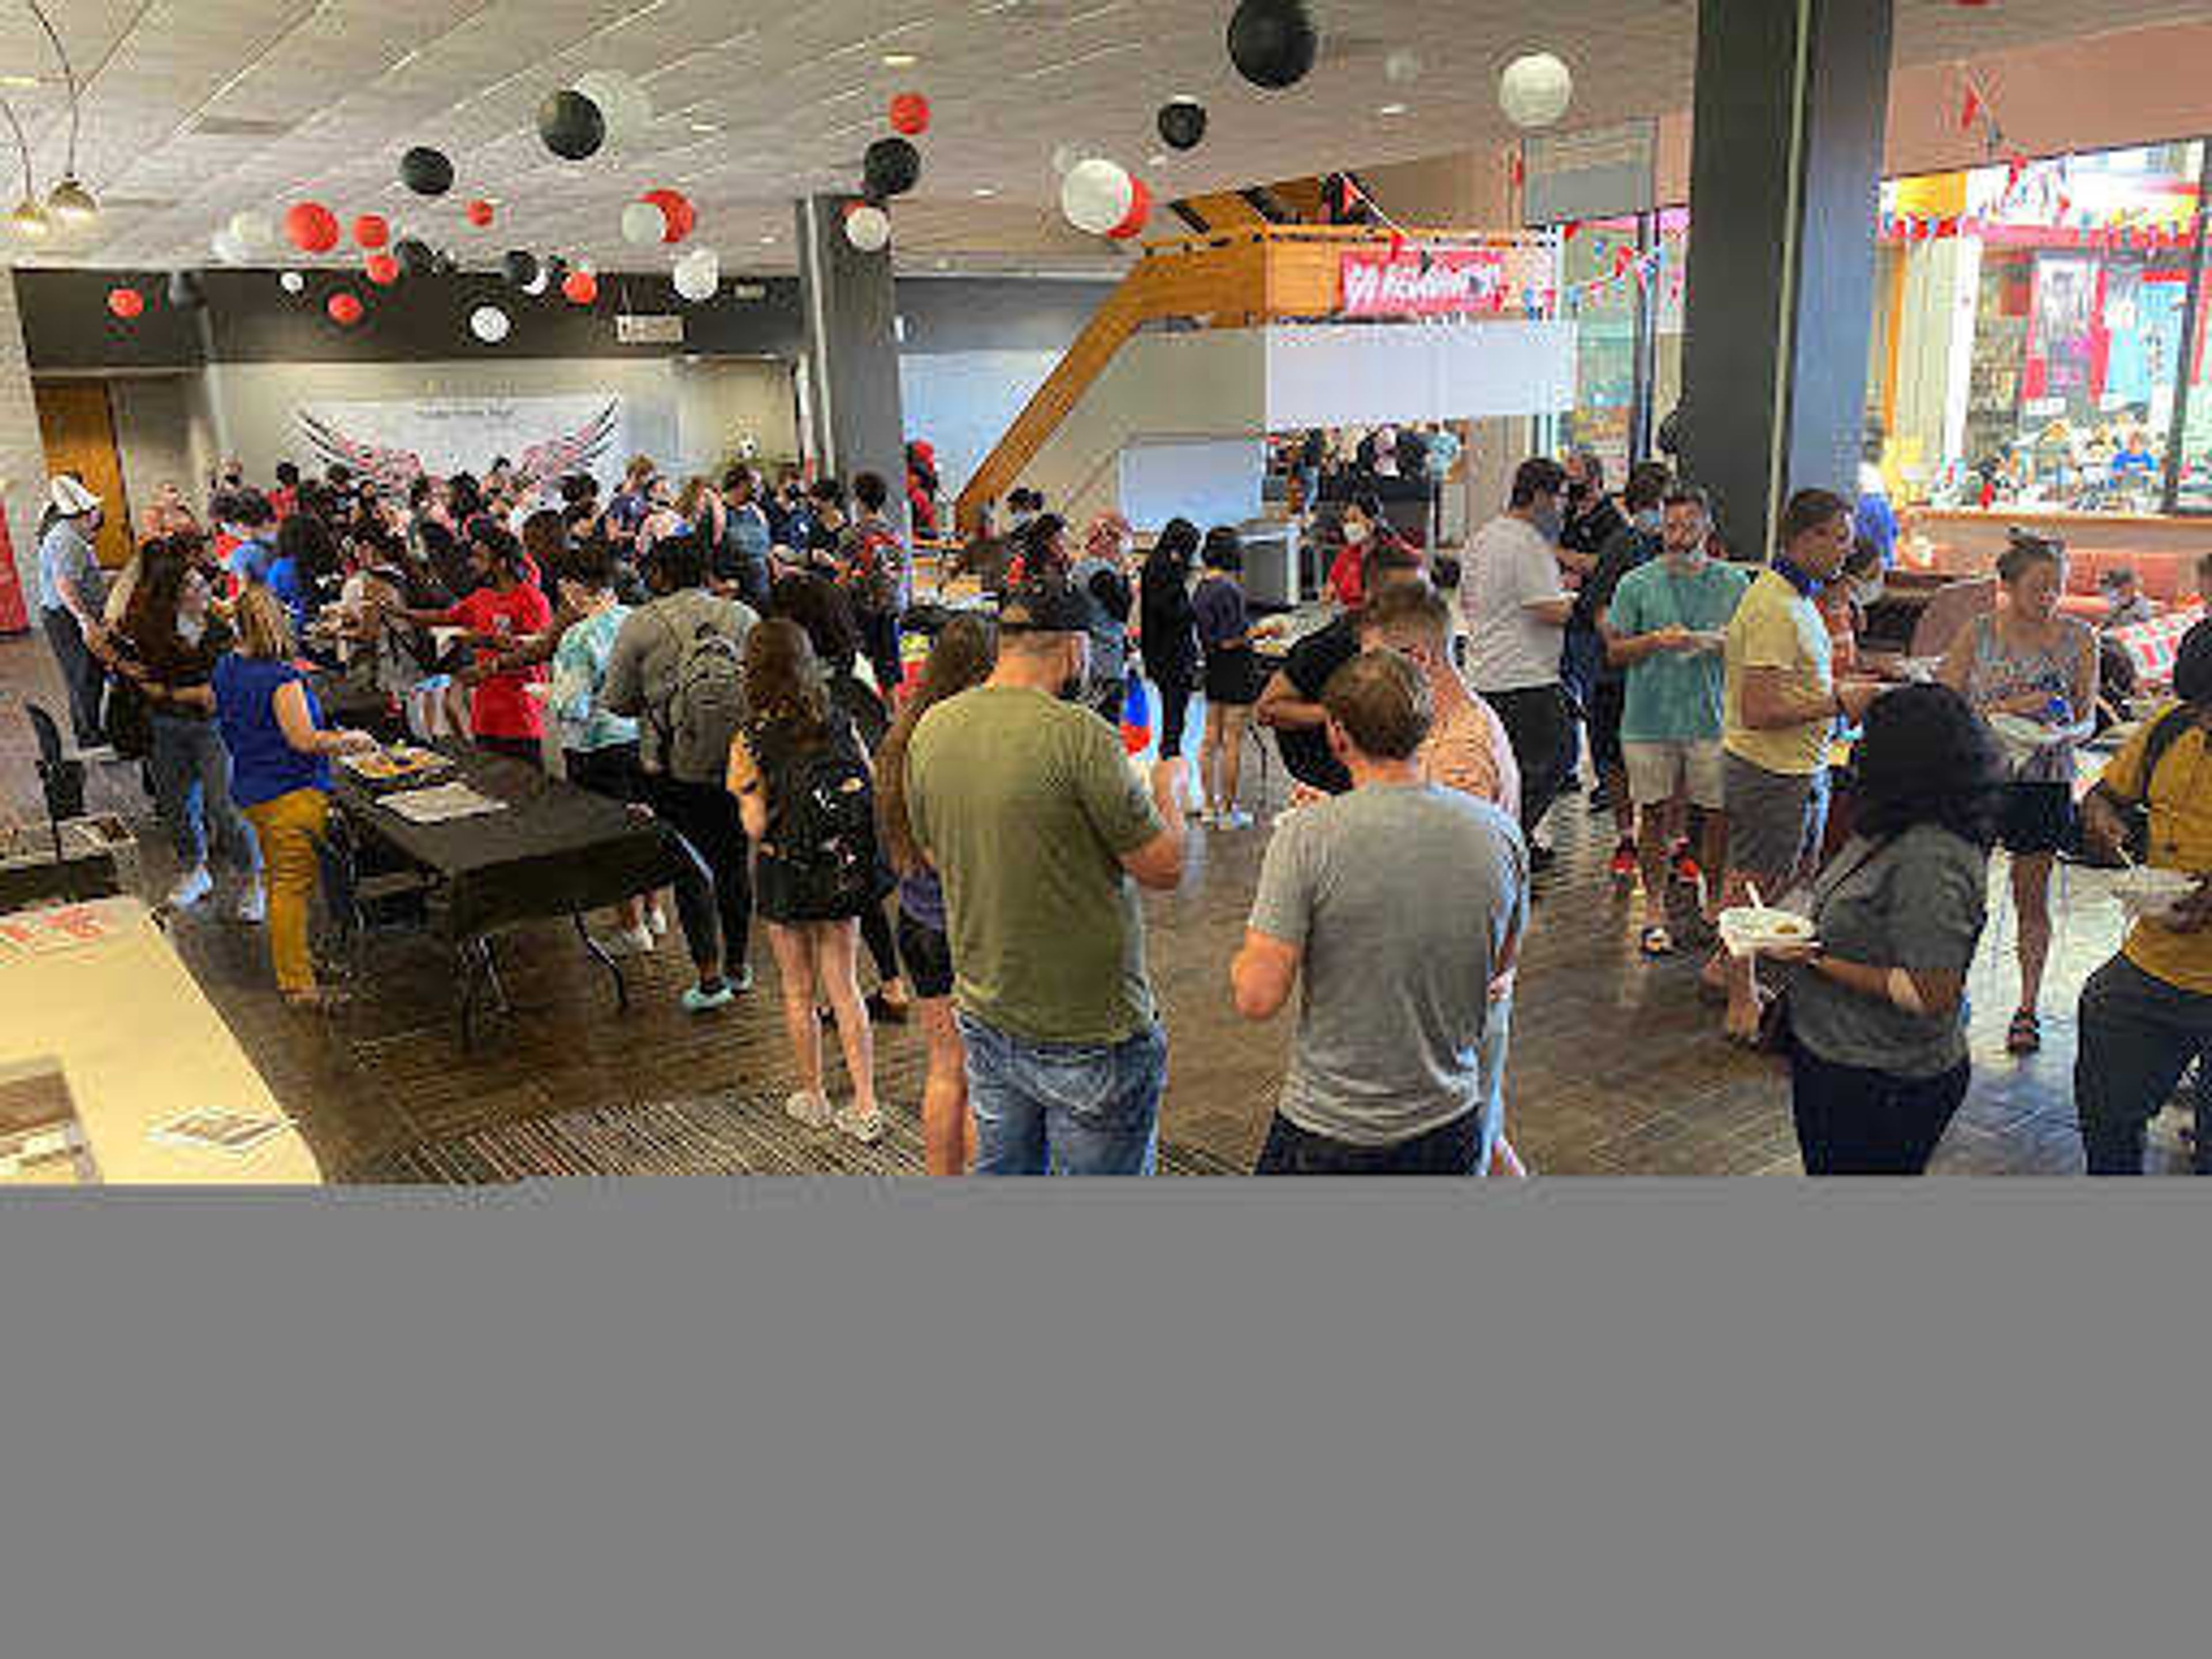 Southeast students feast on international cuisine at the University Center. The International Student Services hosted the Taste of the World event on Aug. 25.